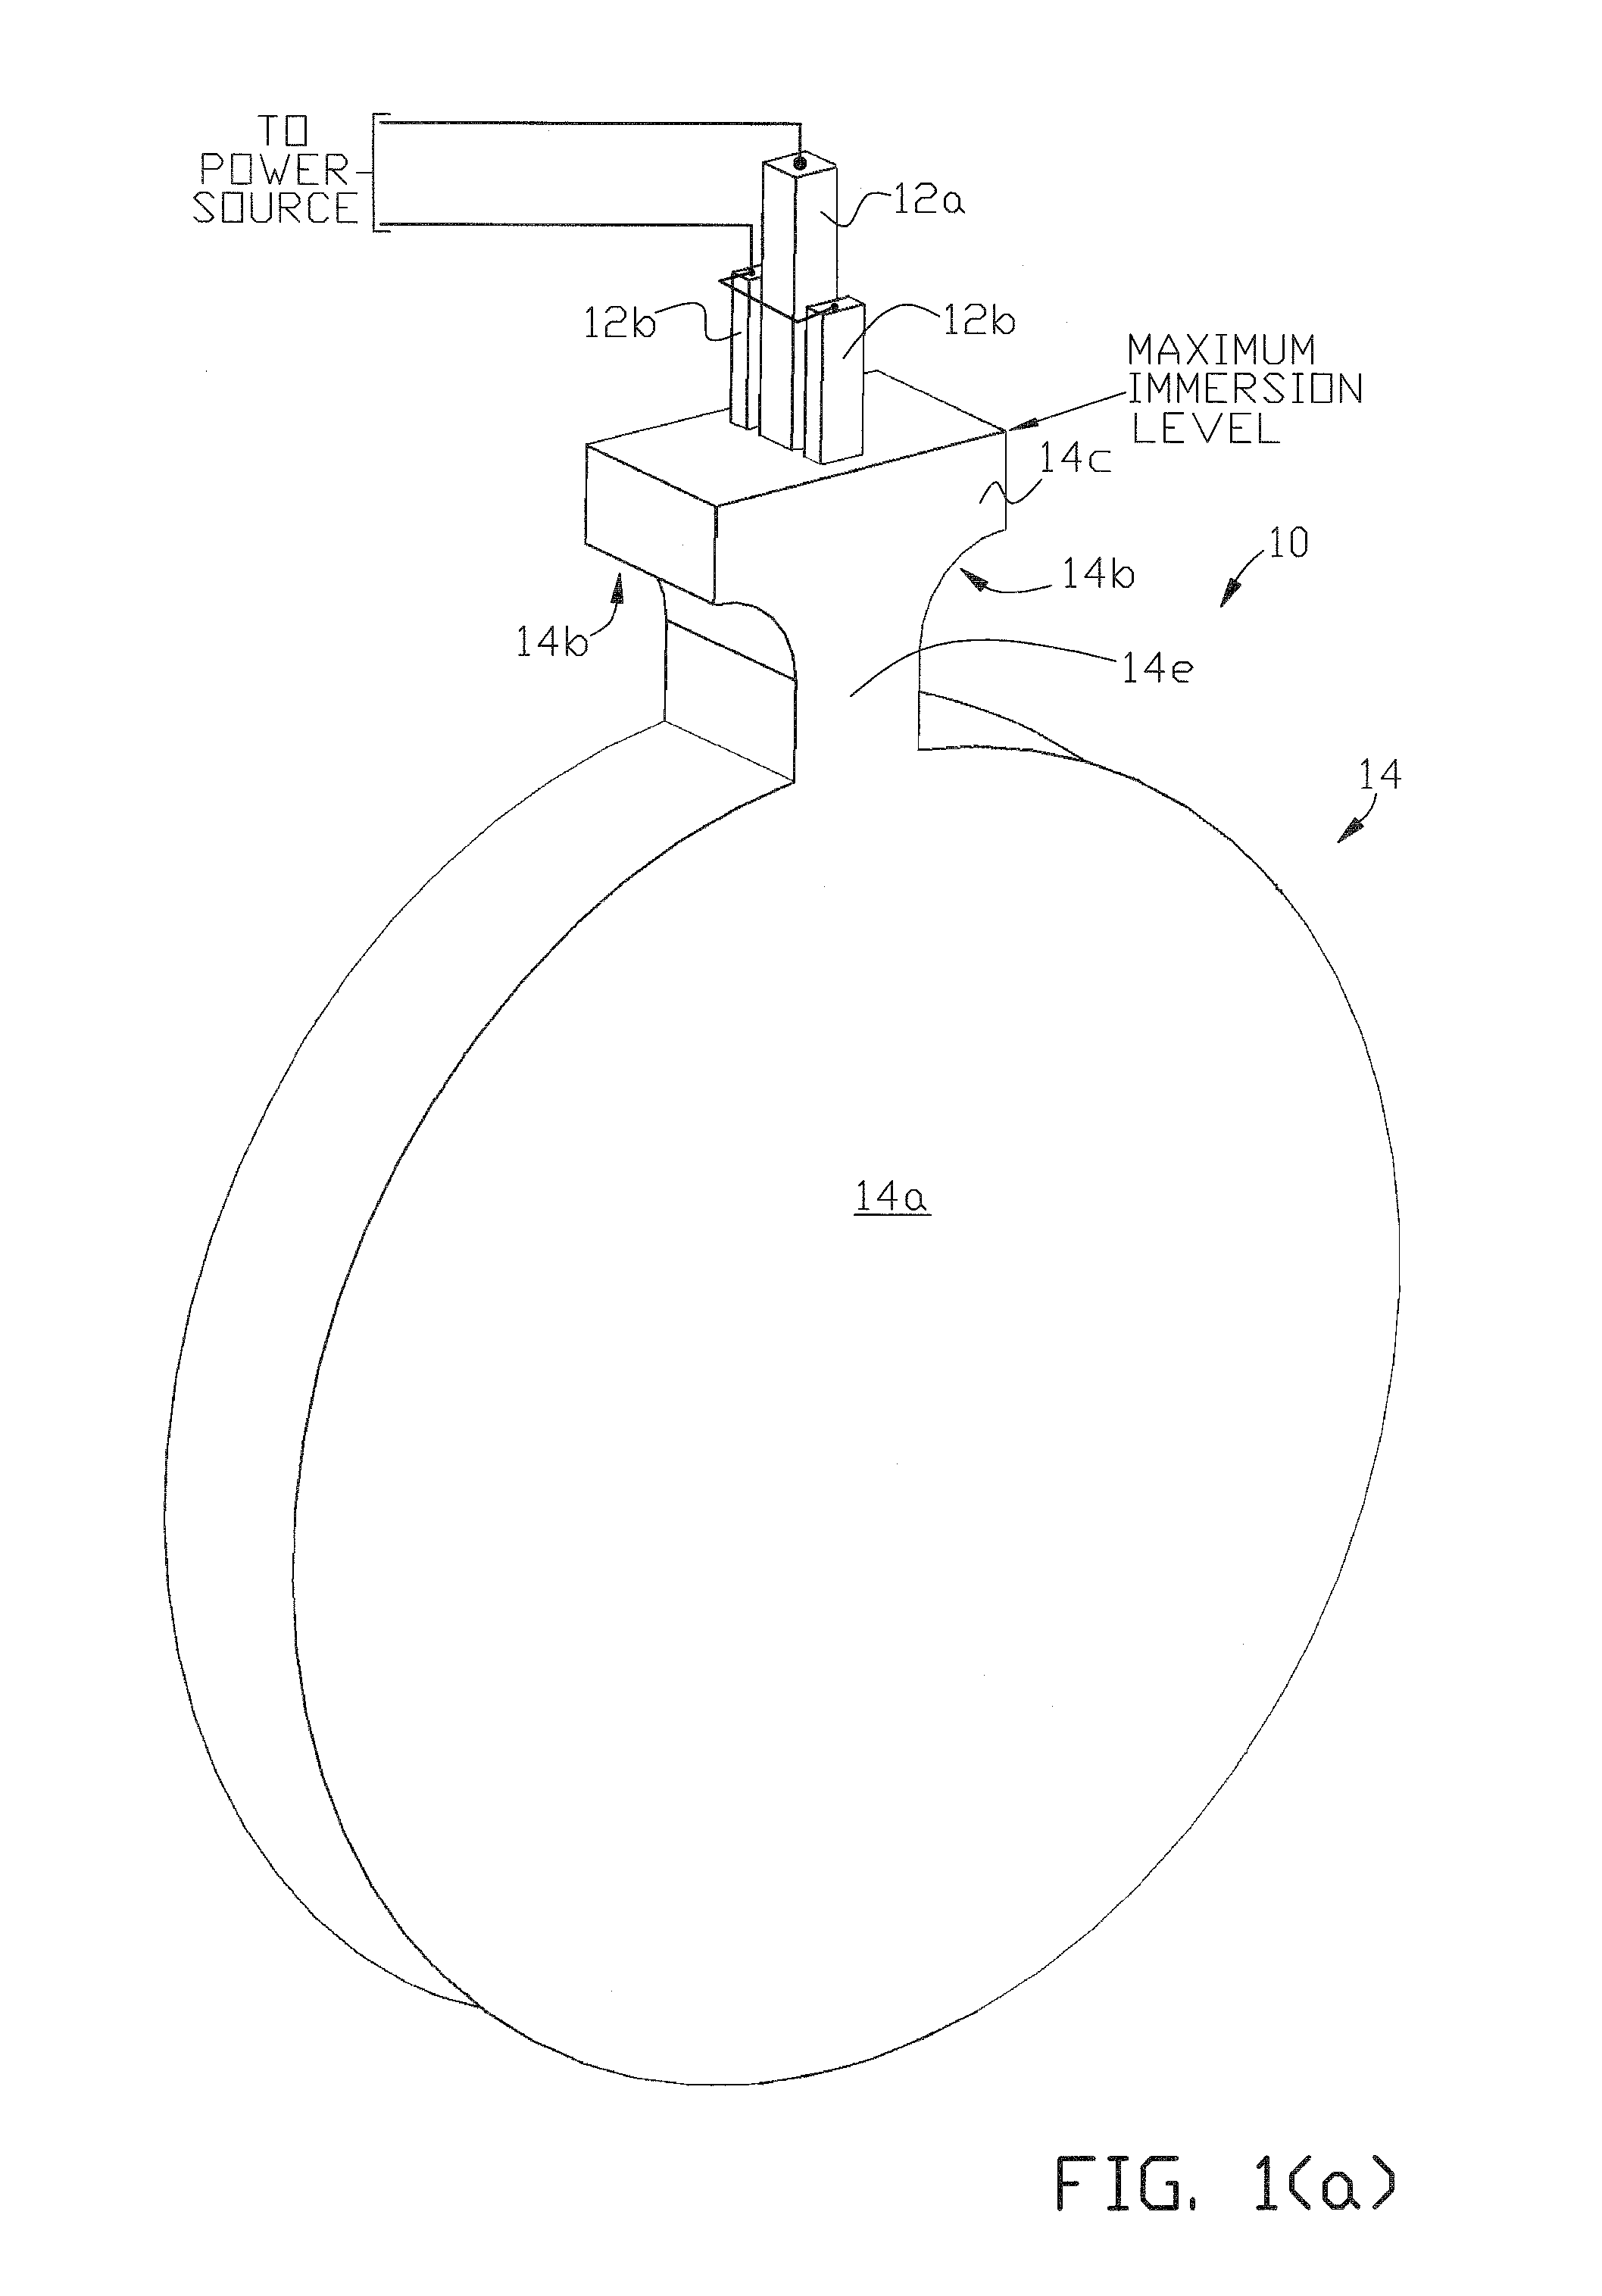 Electric Induction Heating and Stirring of an Electrically Conductive Material in a Containment Vessel